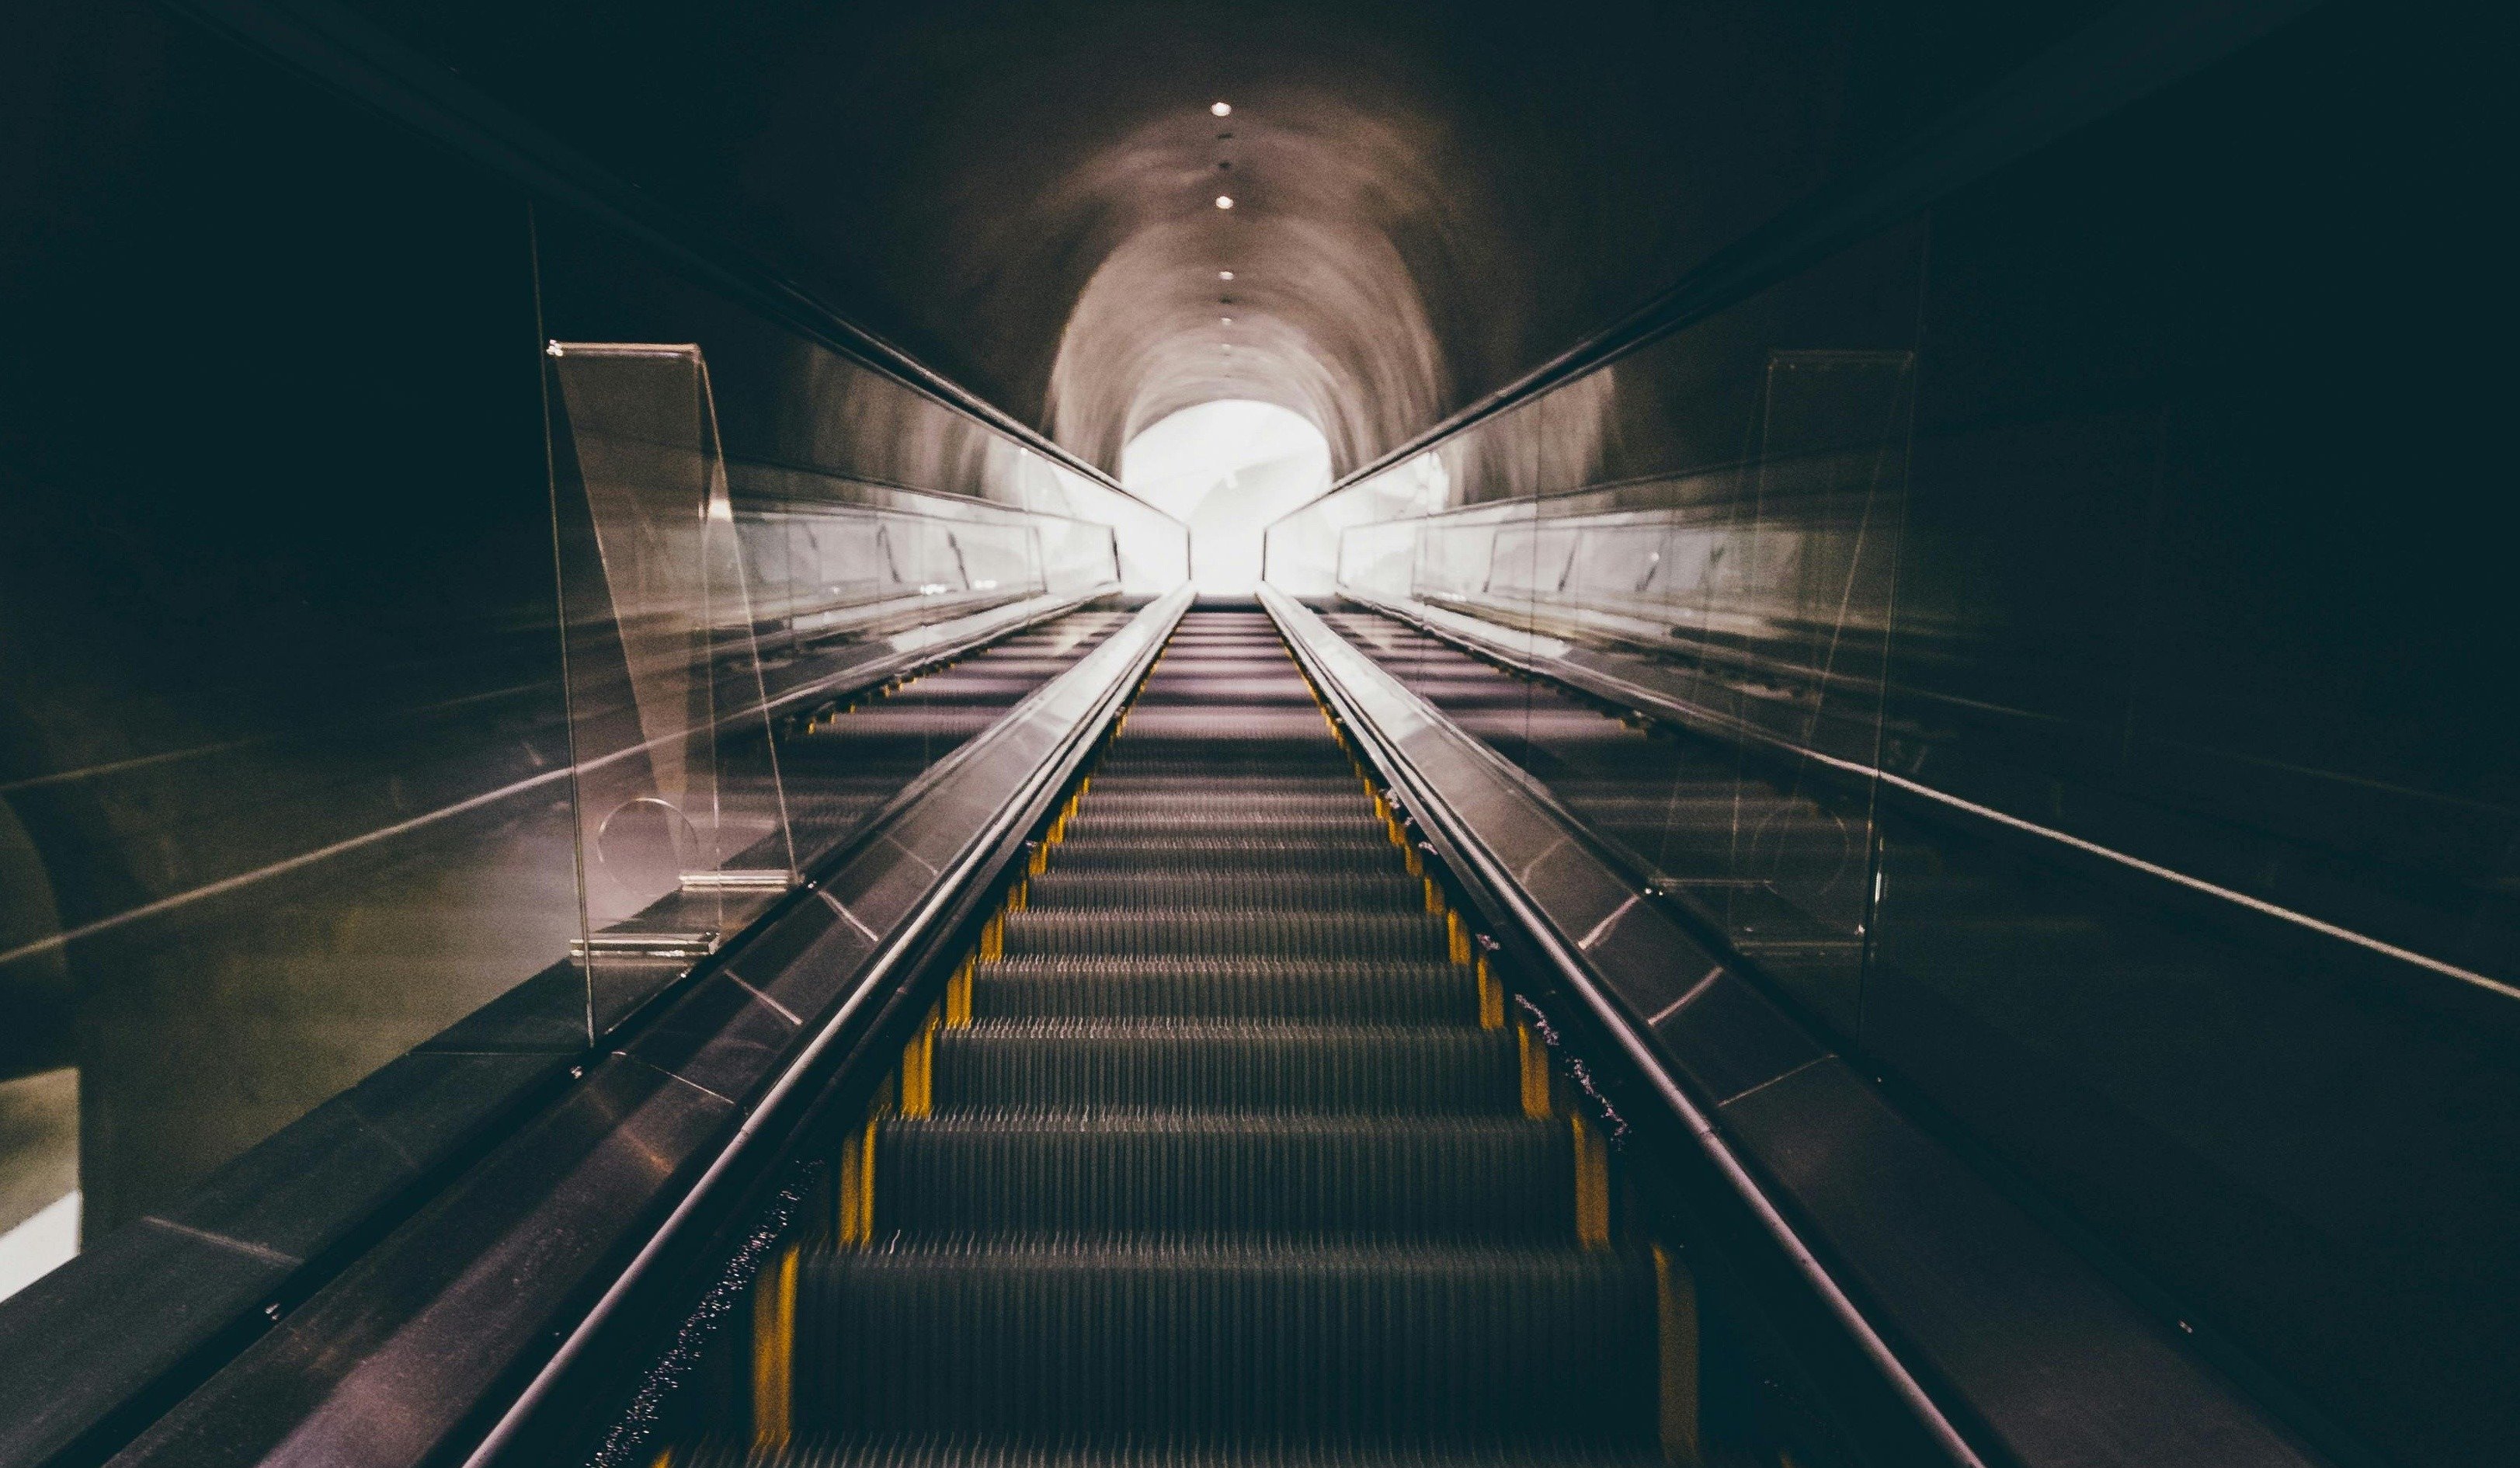 An escalator ascending into a tunnel, providing convenient access to the underground passage.